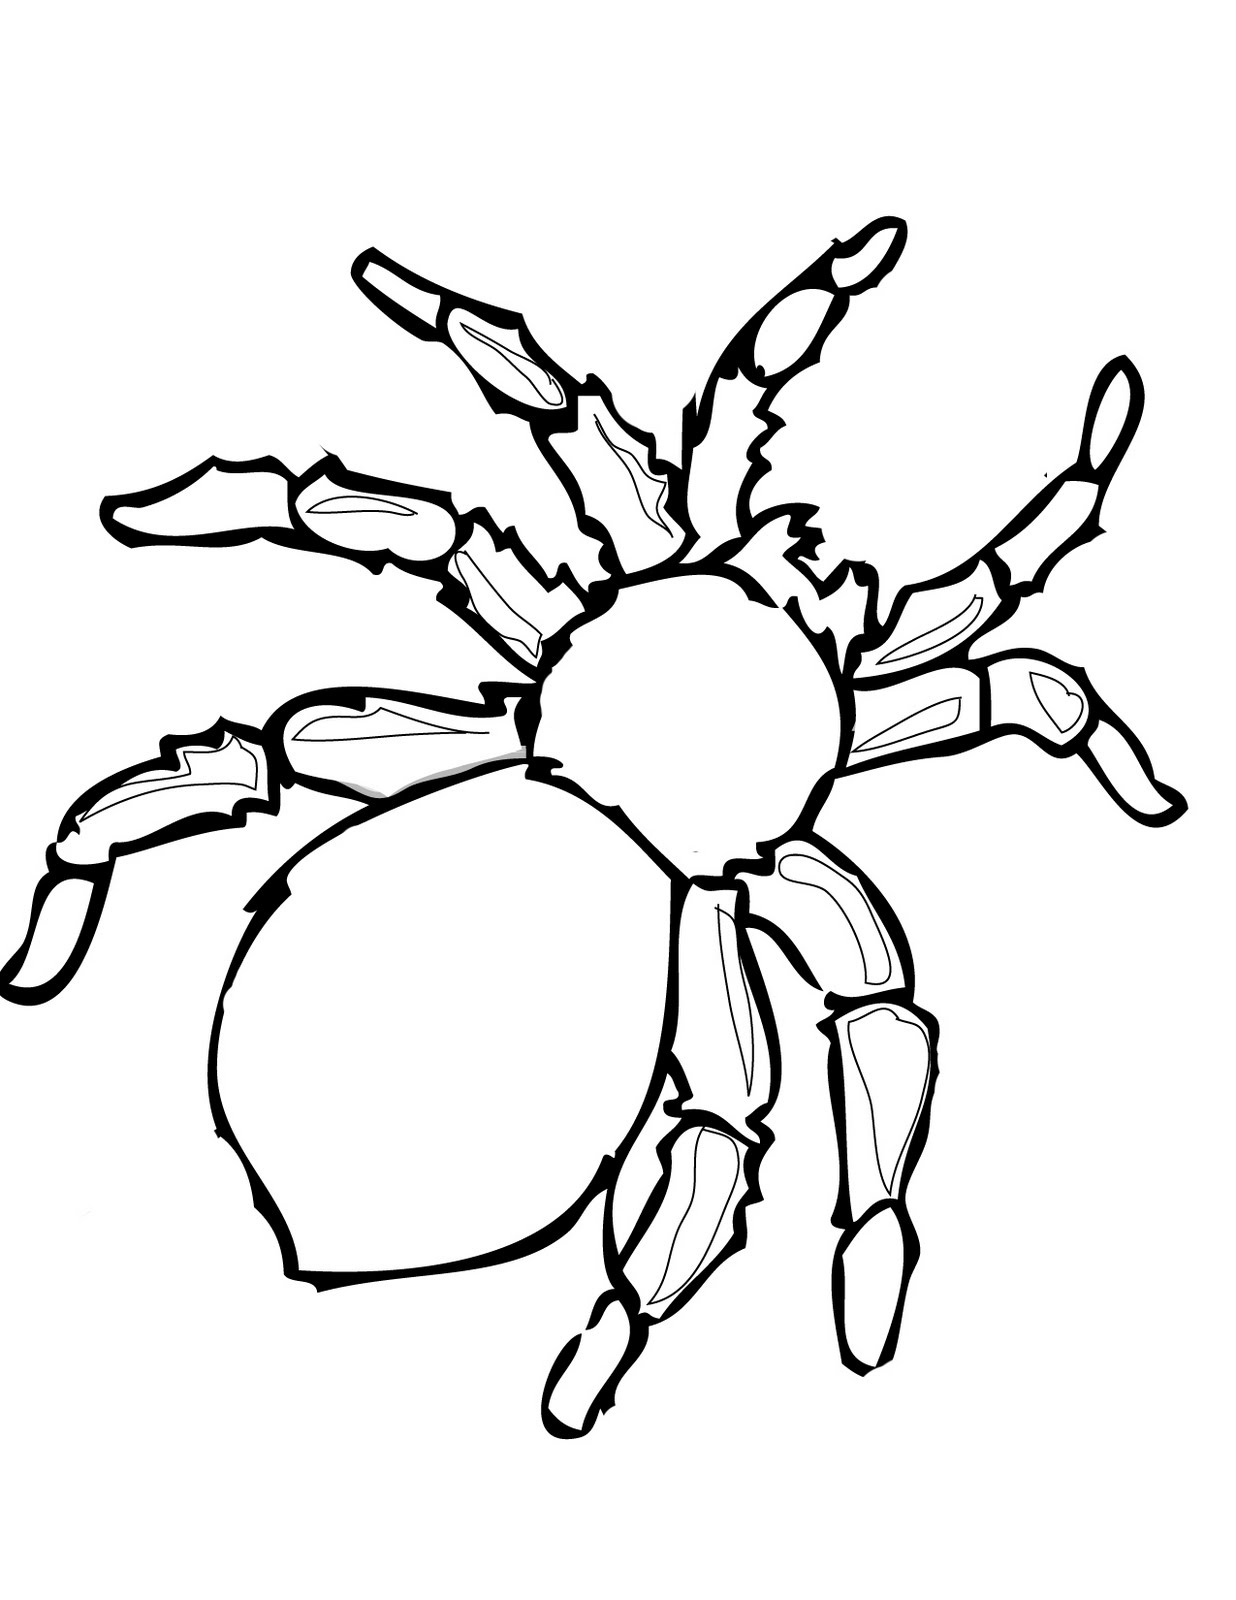 Spider coloring #12, Download drawings